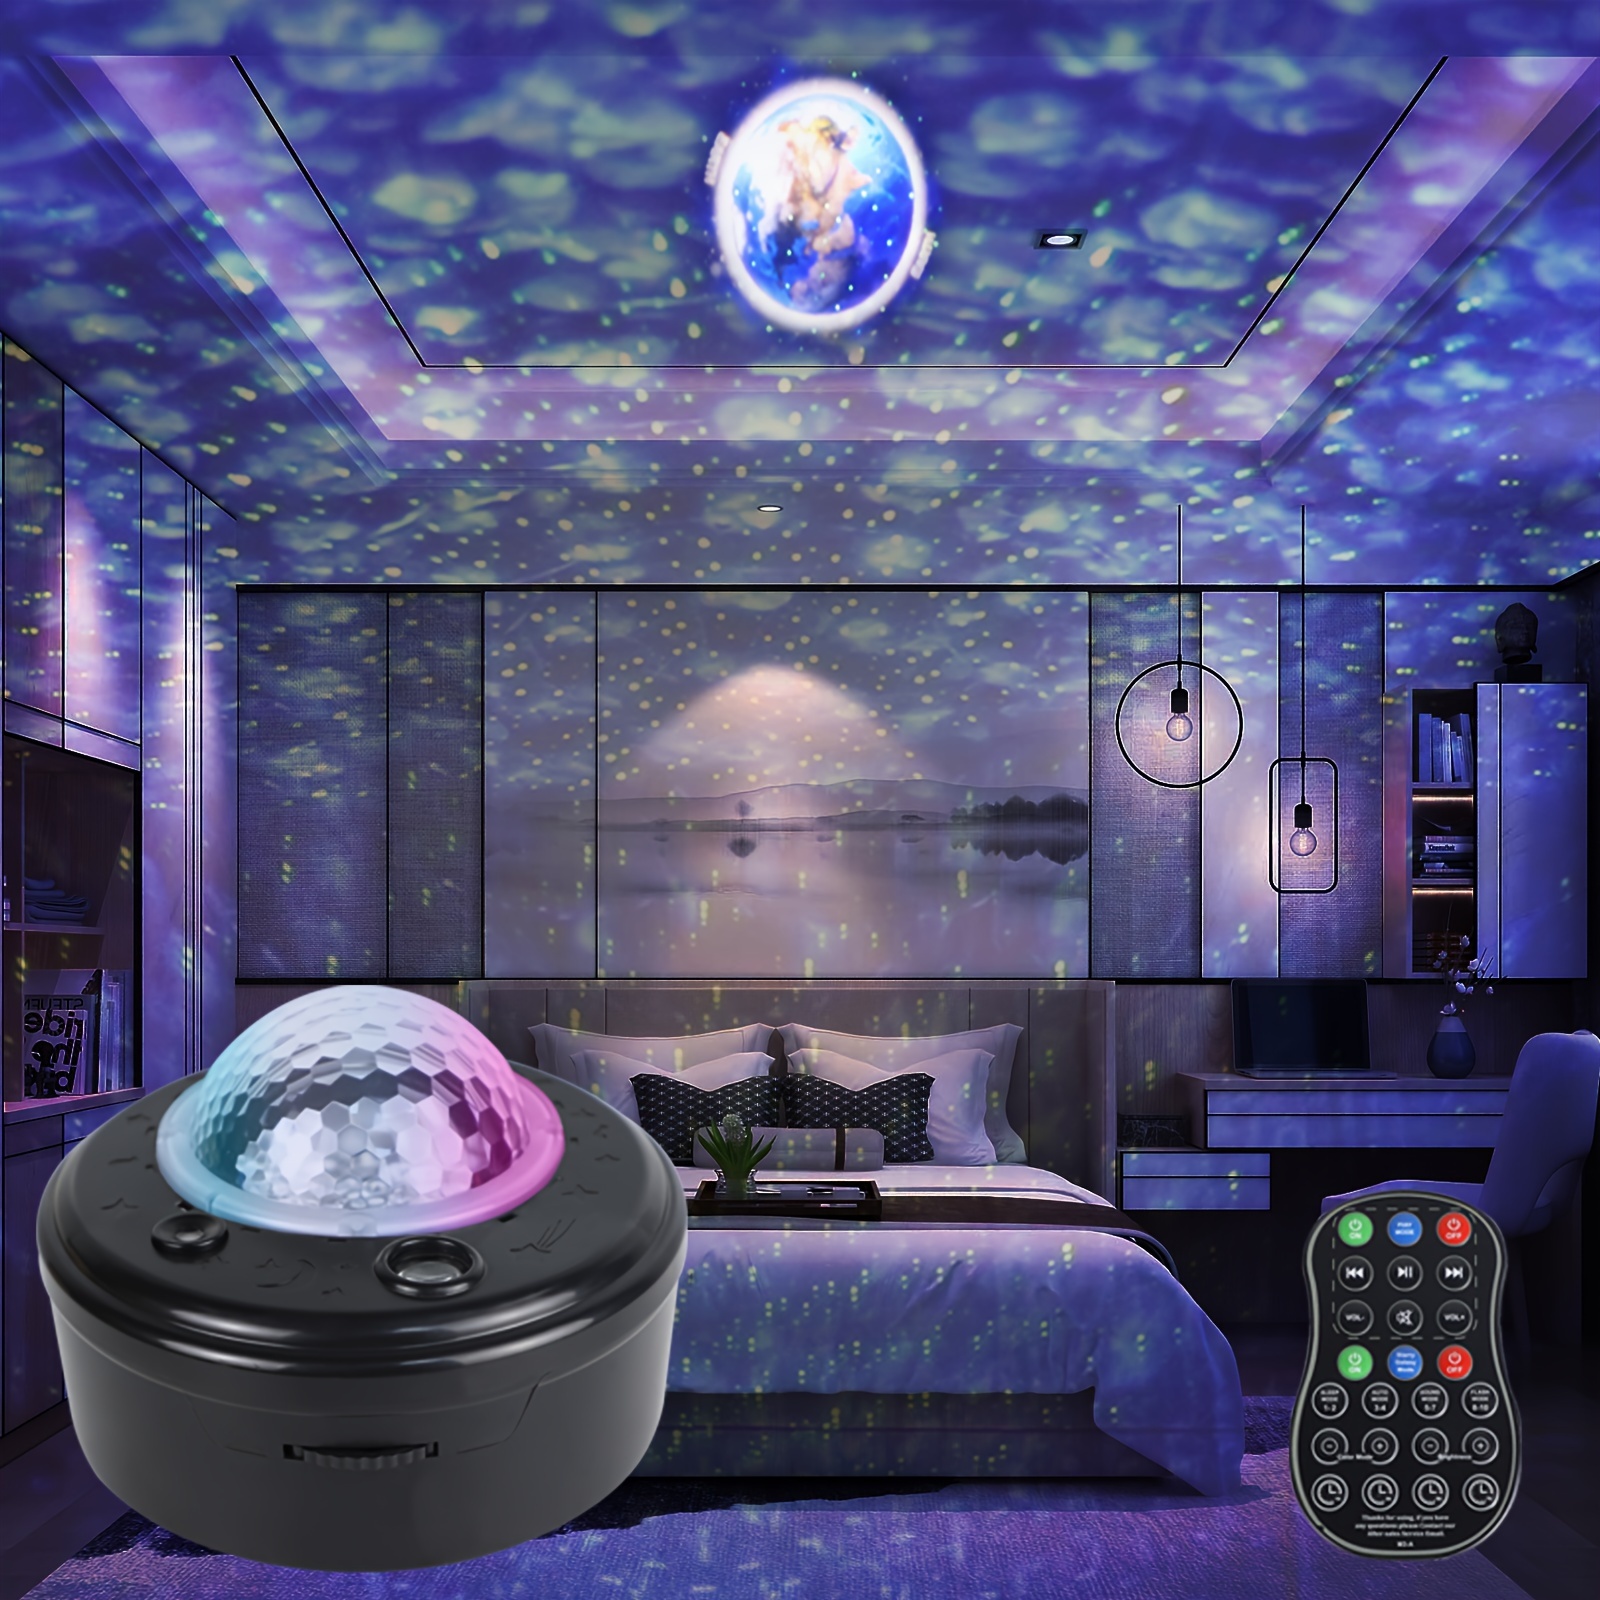 Smart Galaxy Projector with Nebula Cloud/Moving Ocean Wave, WiFi Star  Projector for Room Decor, Home Theater Night Light Projector, Compatible  with